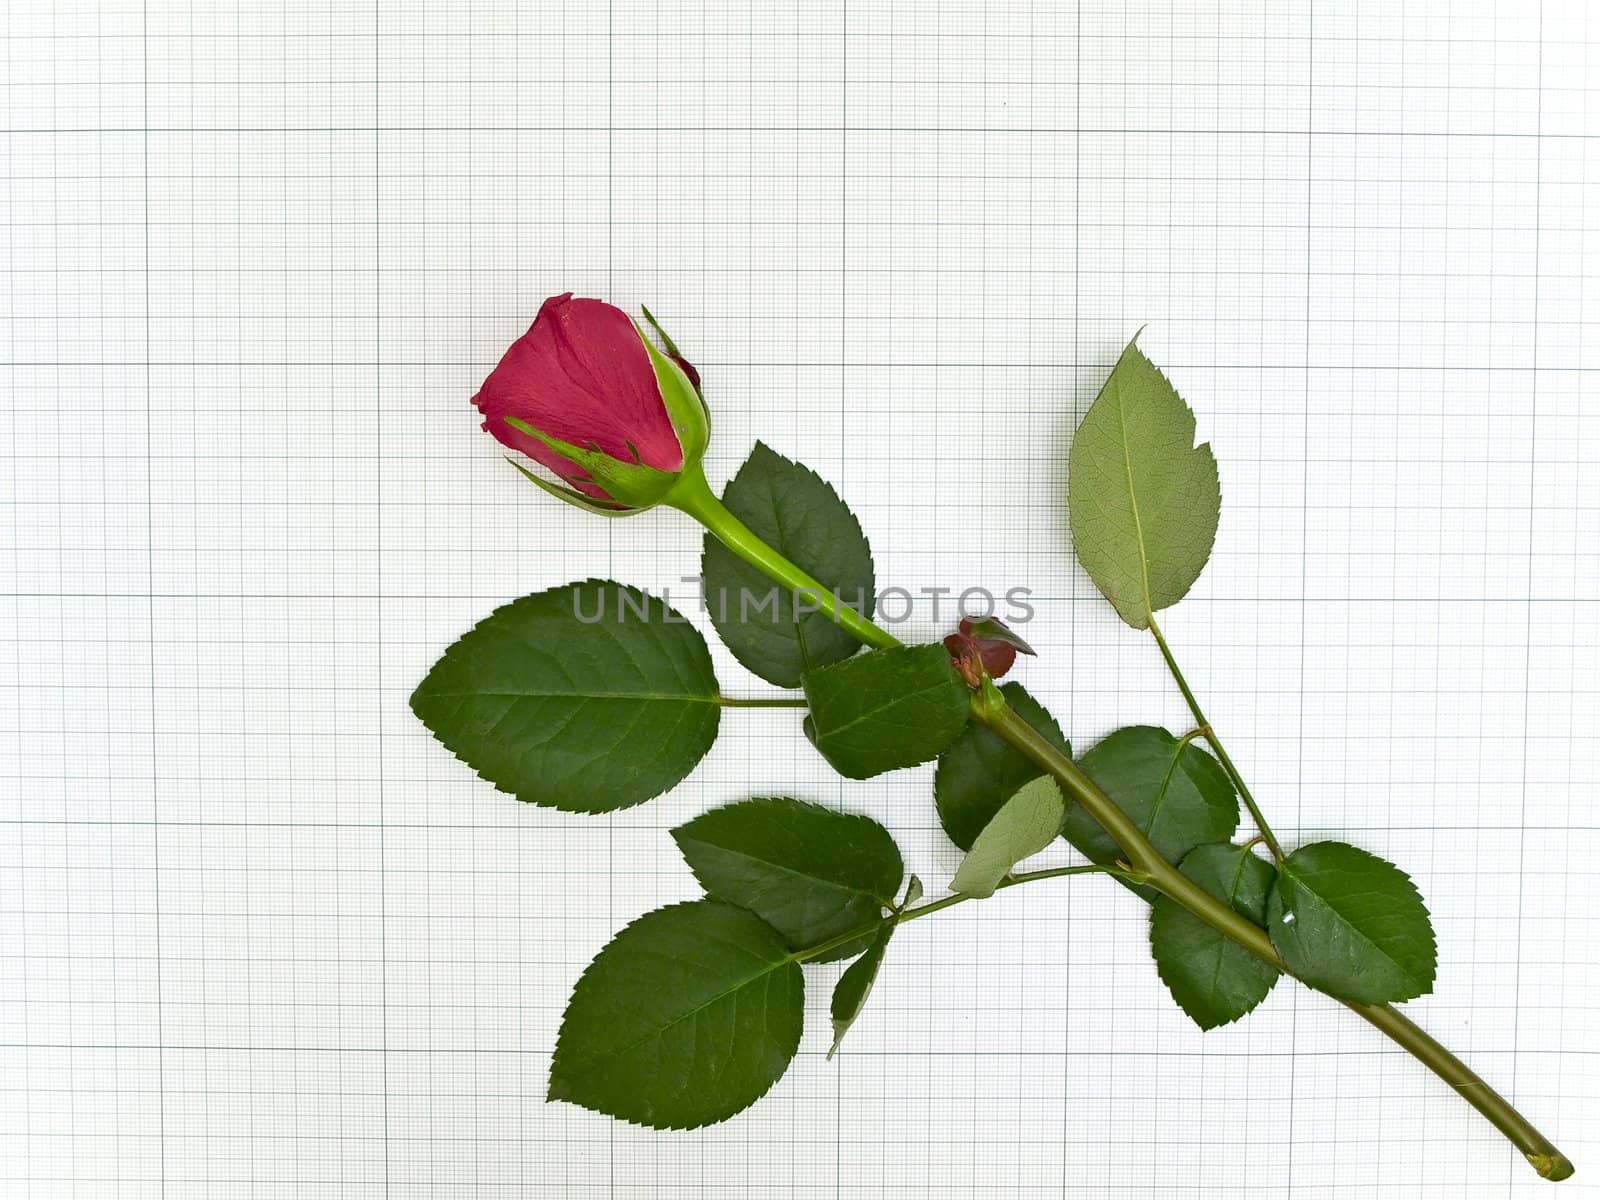 Single red rose at the plotting paper